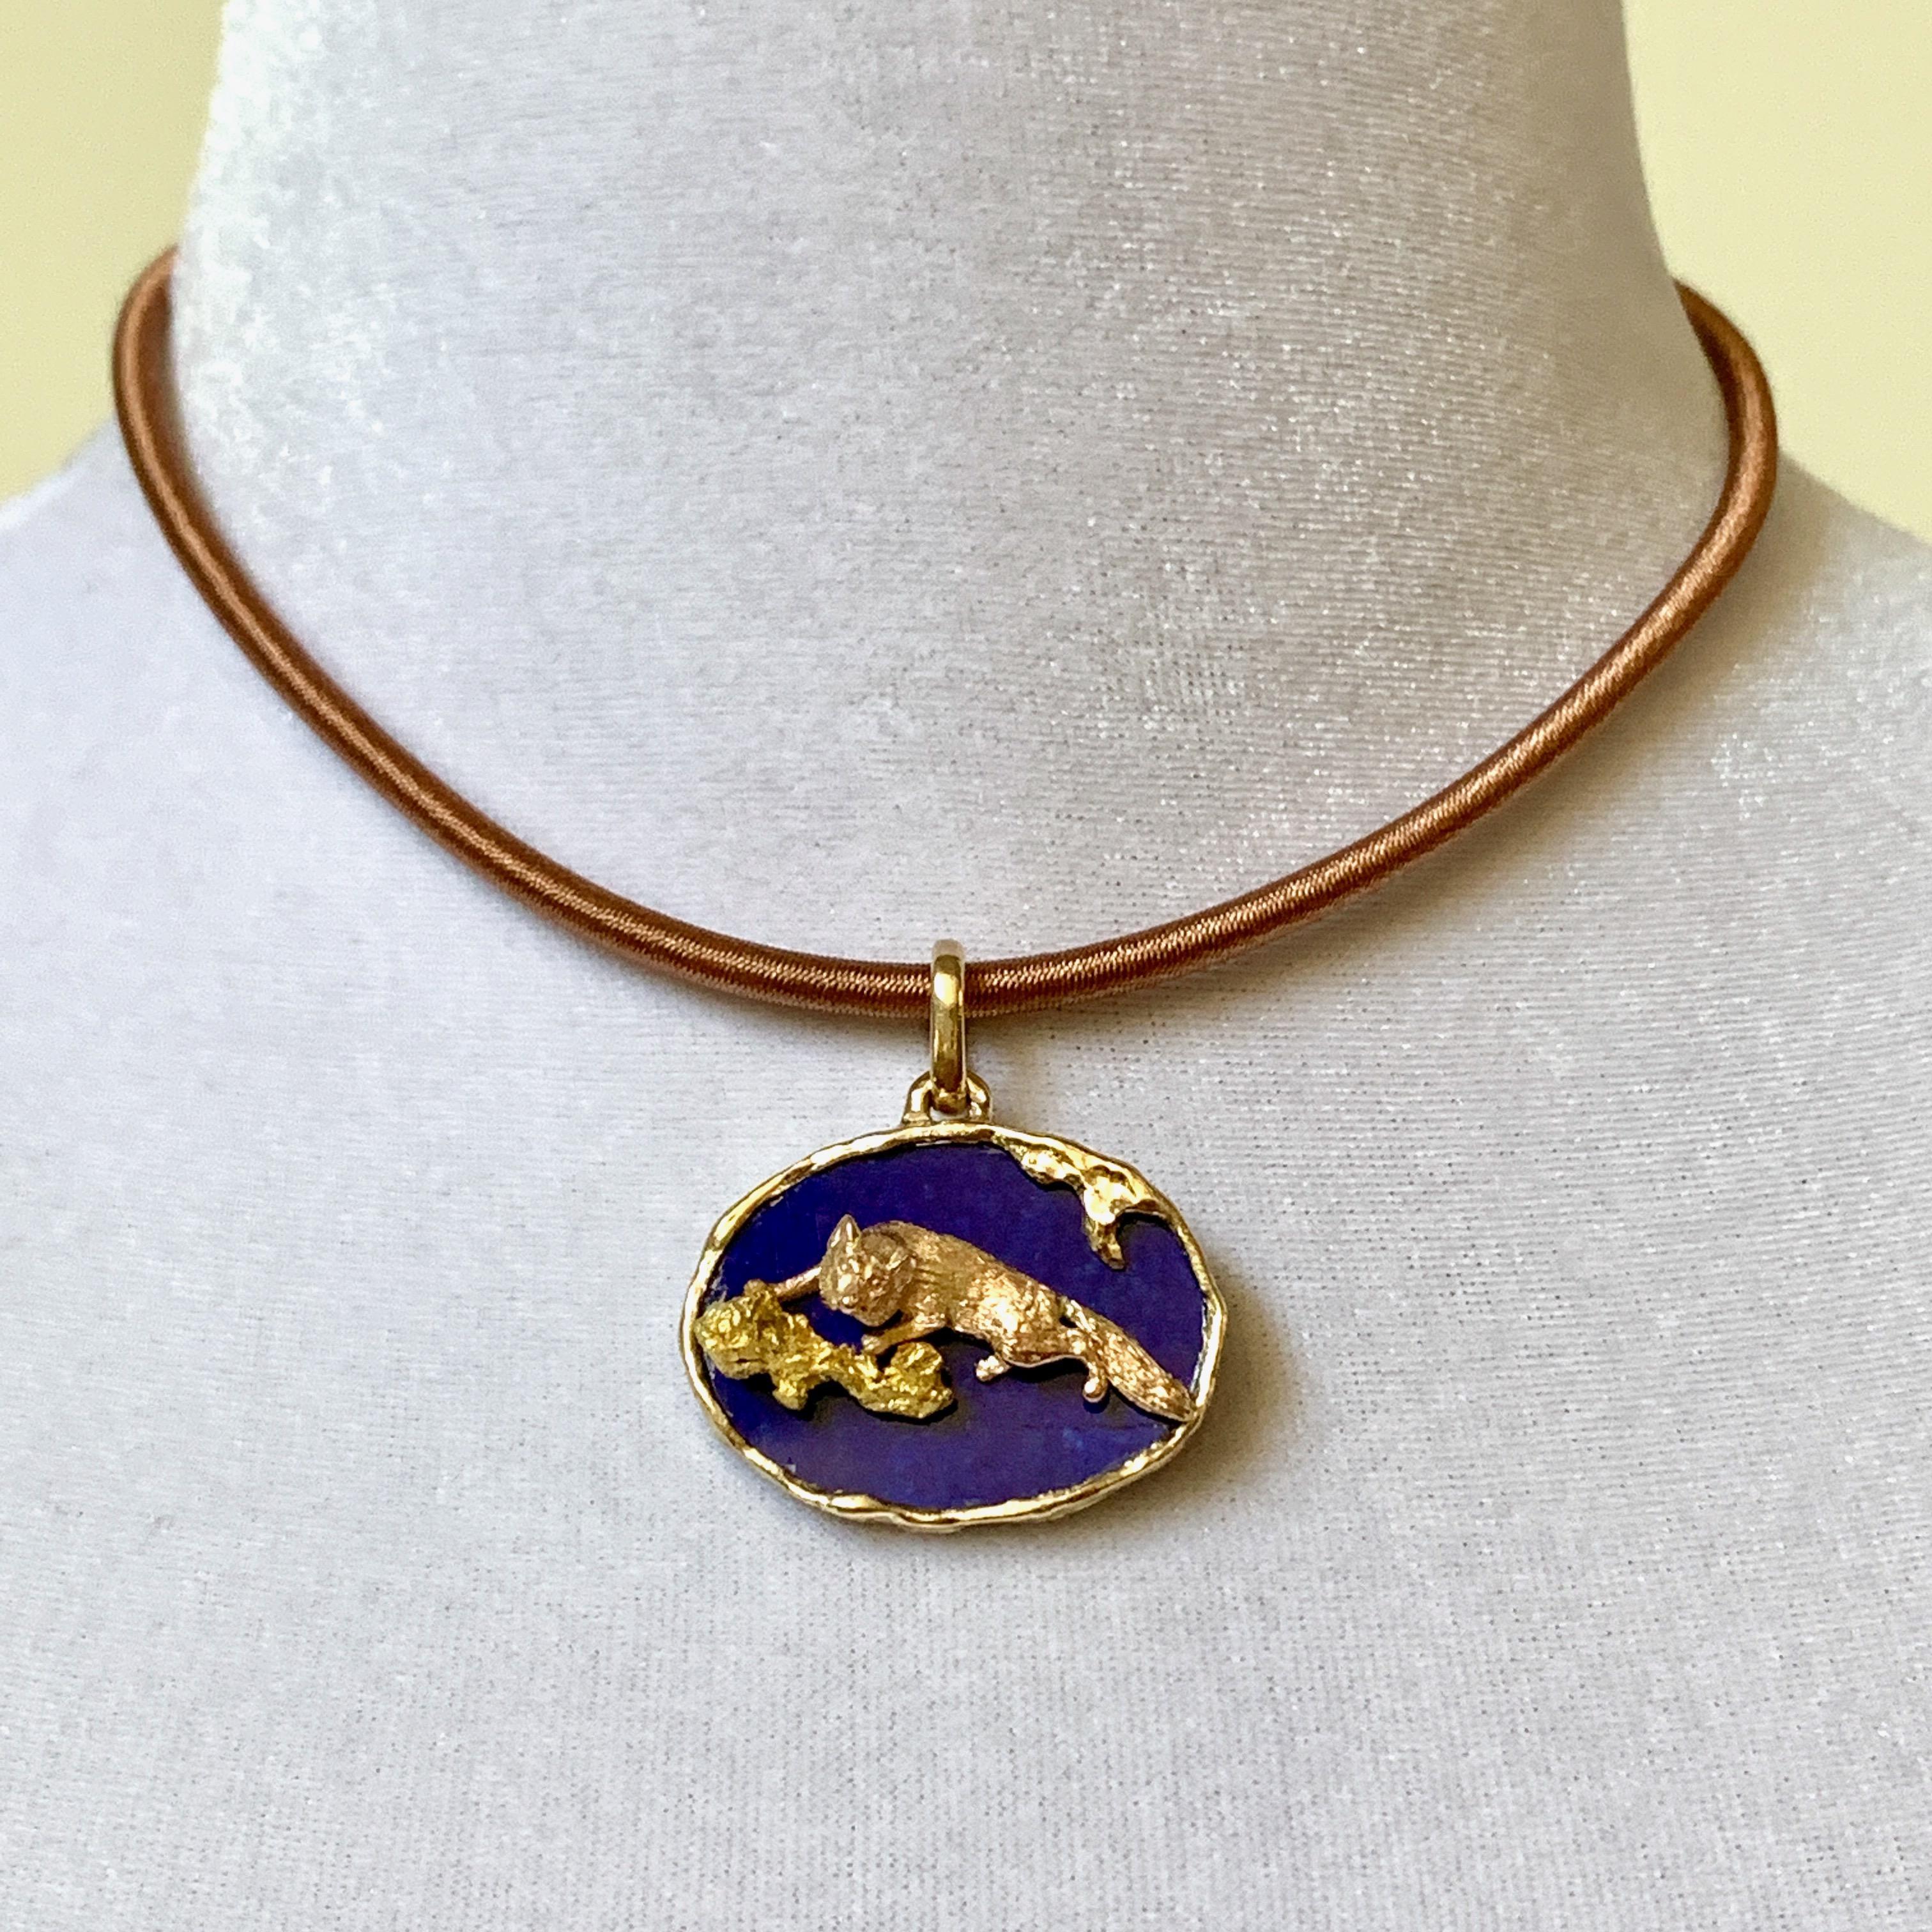 This one-of-a-kind pendant by Eytan Brandes features a sneaky little rose gold fox taking cover behind a 